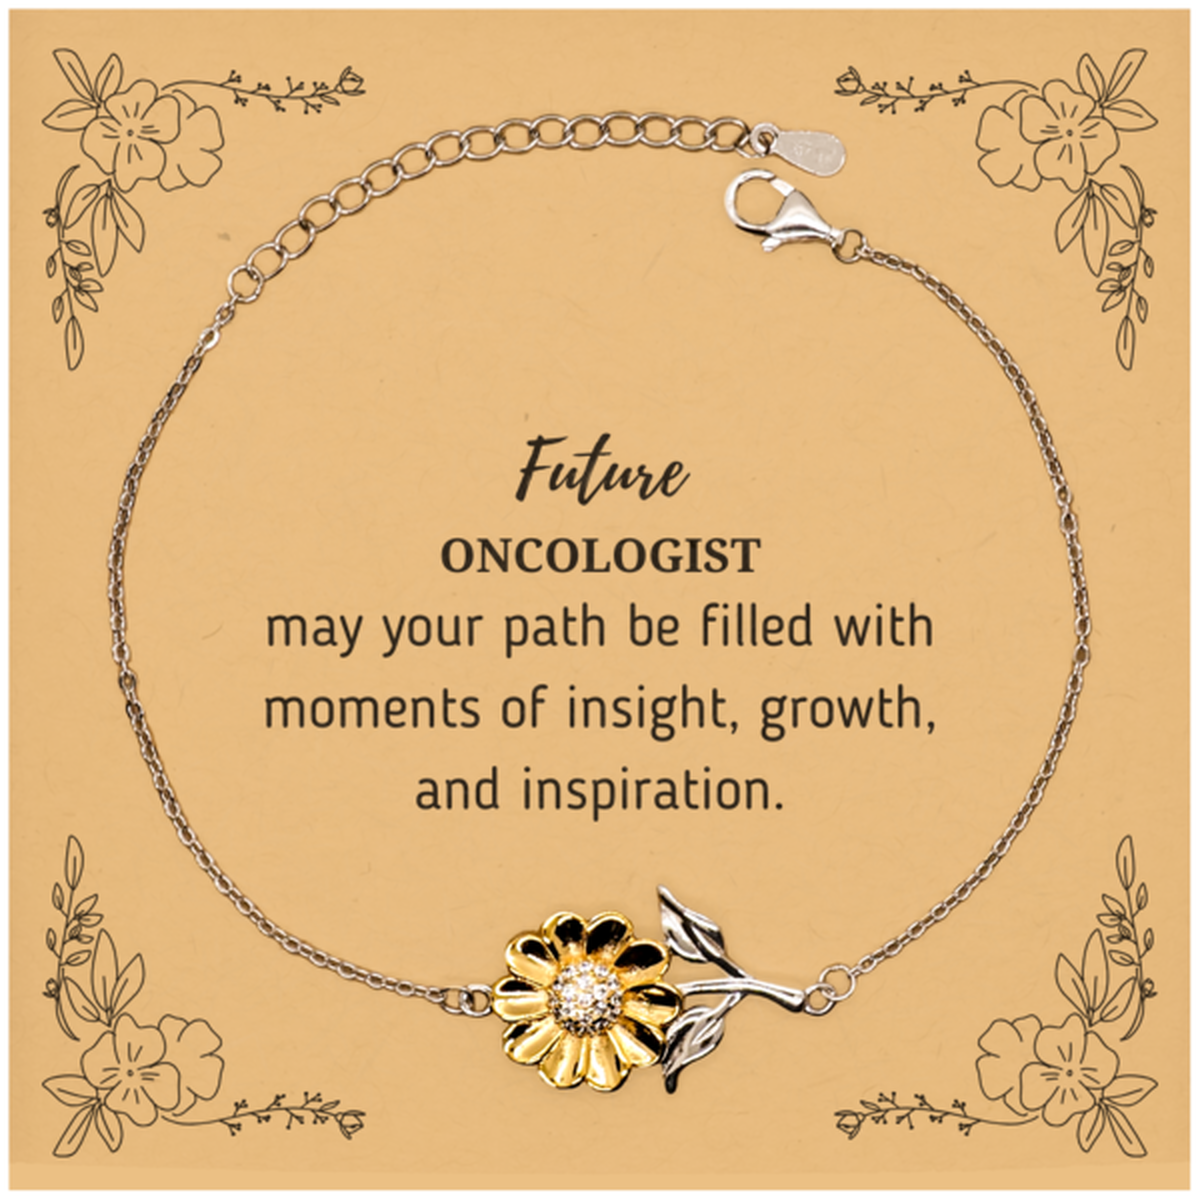 Future Oncologist Gifts, May your path be filled with moments of insight, Graduation Gifts for New Oncologist, Christmas Unique Sunflower Bracelet For Men, Women, Friends